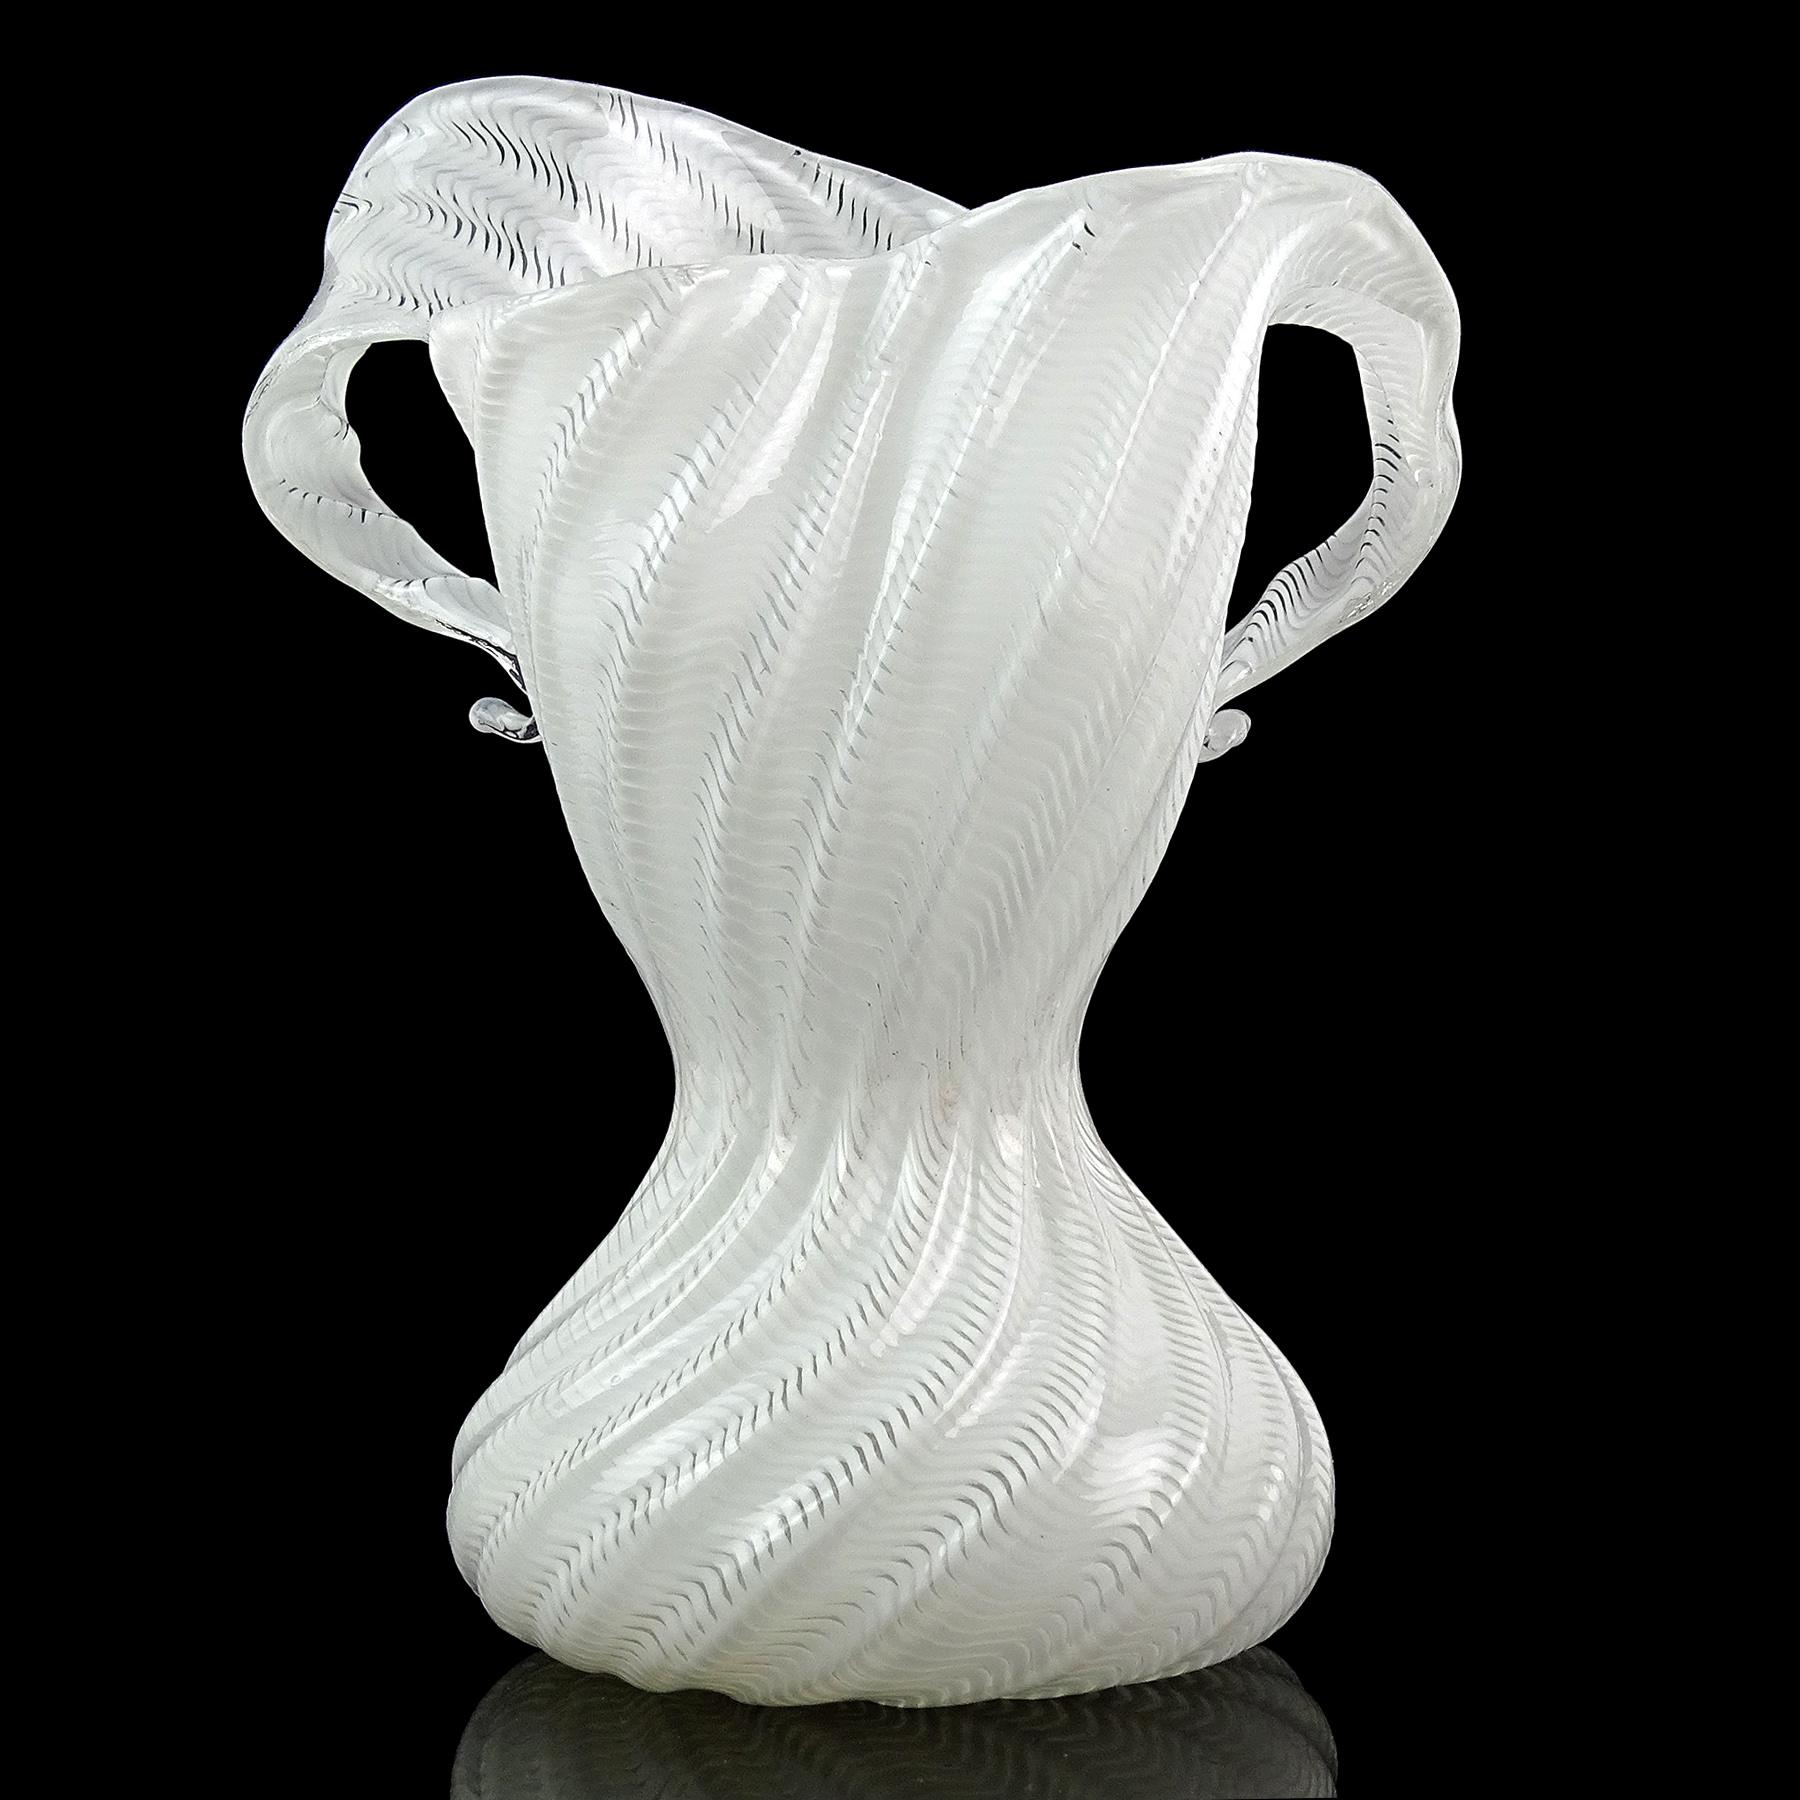 Gorgeous and rare, vintage Murano hand blown white ribbons Italian art glass sculptural woman shape, body dress, flower vase. Documented to designer Dino Martens for Aureliano Toso, circa 1954, model number 5961. The piece is published in the